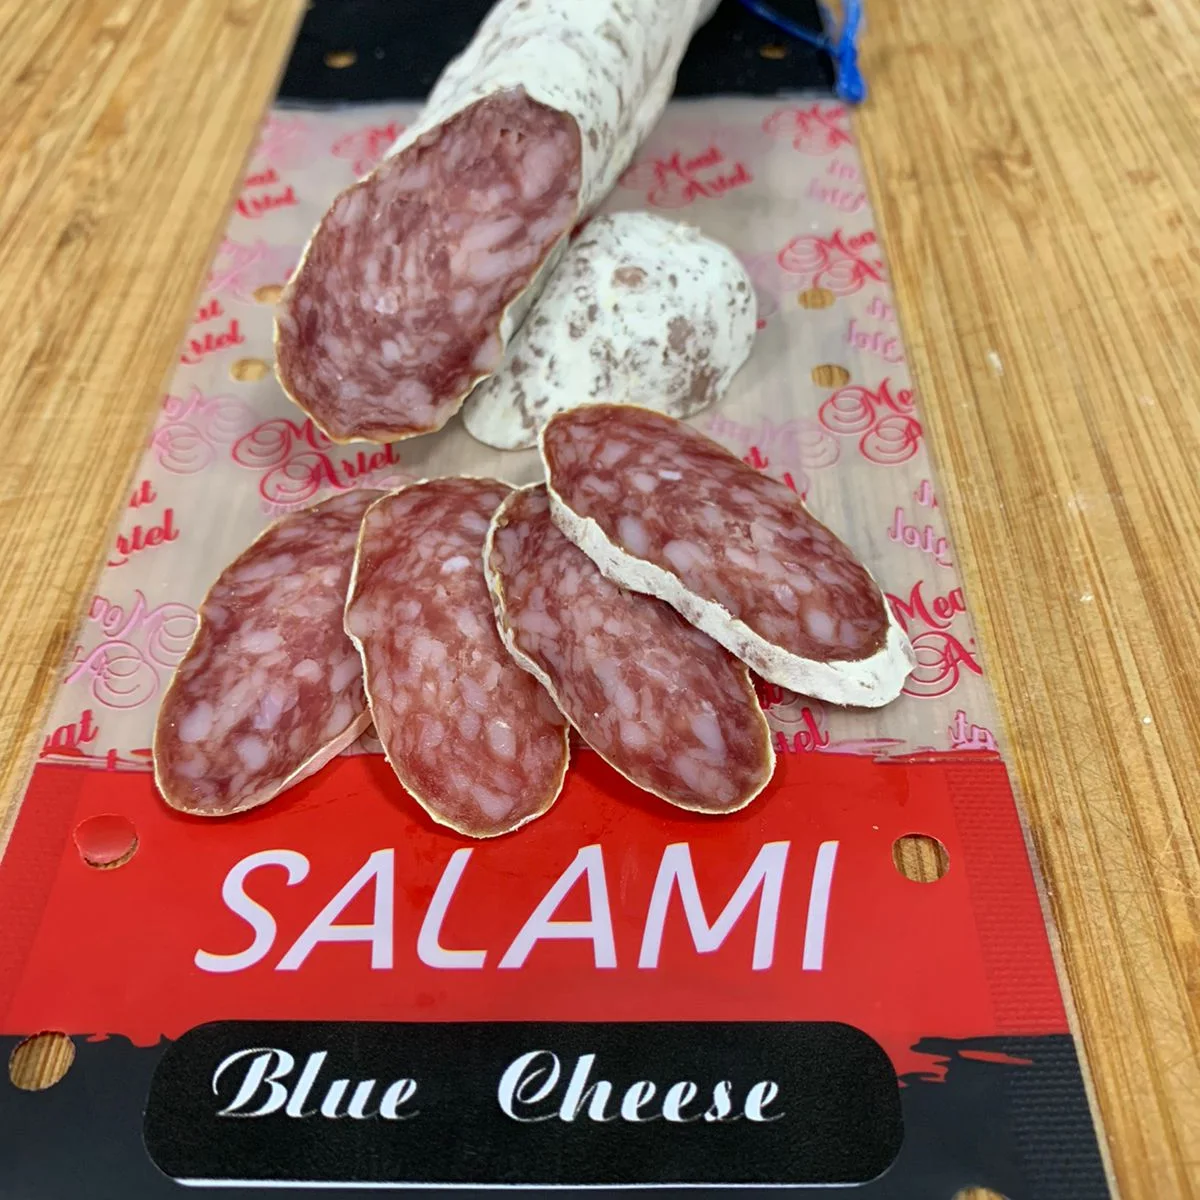 Salami Blue Cheese Salame Blue Cheese pork cured sausage with natural cheese with blue mold